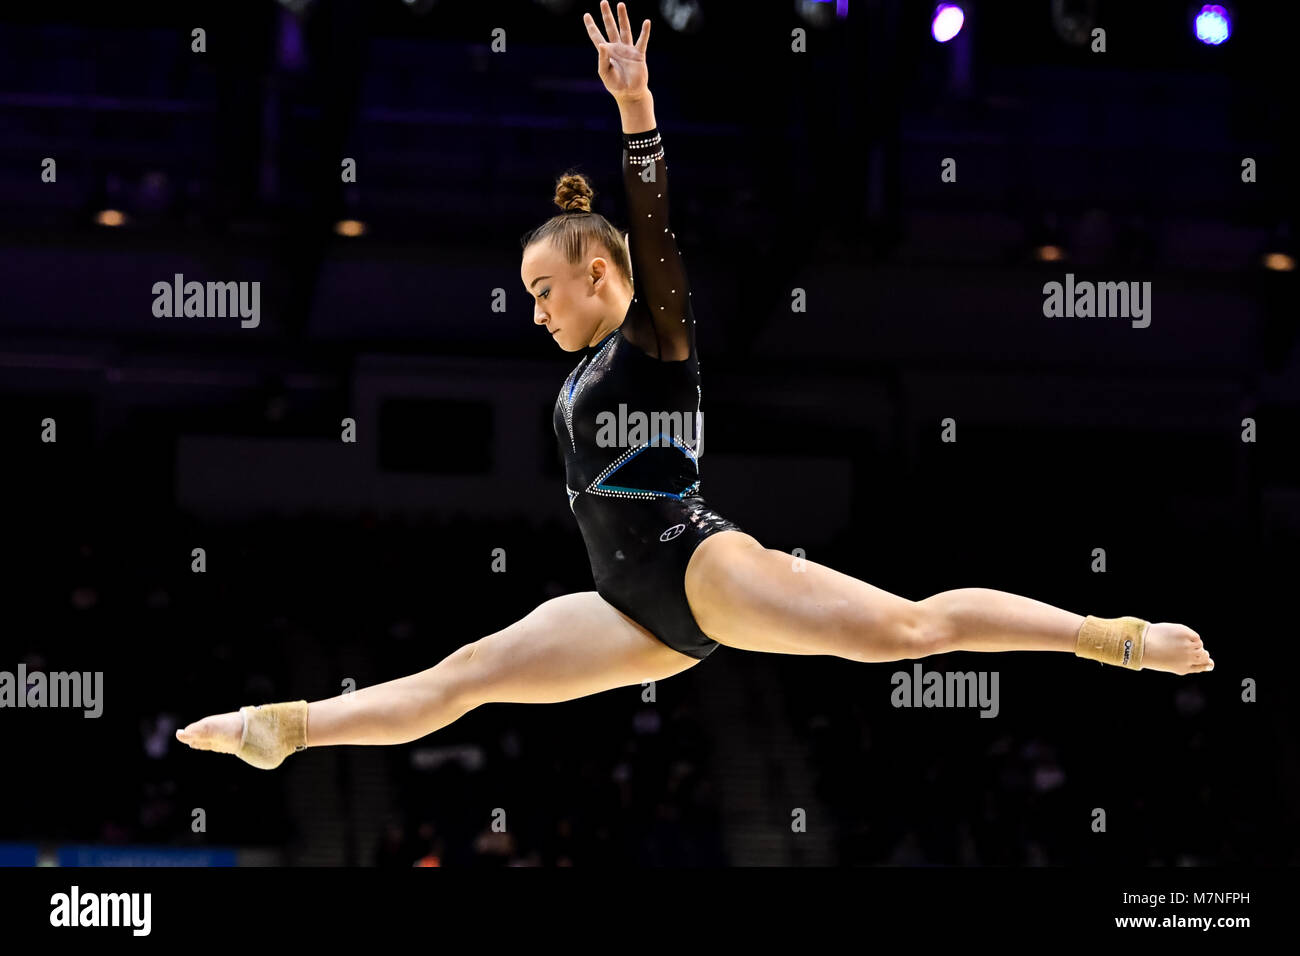 Echo Arena, Liverpool, UK. 11th Mar, 2018. Eilee Cheetham competes on the Balance Beam during the WAG Senior Apparatus Final/MAG Masters of the 2018 Gymnastics British Championships at Echo Arena on Sunday, 11 March 2018. LIVERPOOL ENGLAND. Credit: Taka G Wu Credit: Taka Wu/Alamy Live News Stock Photo